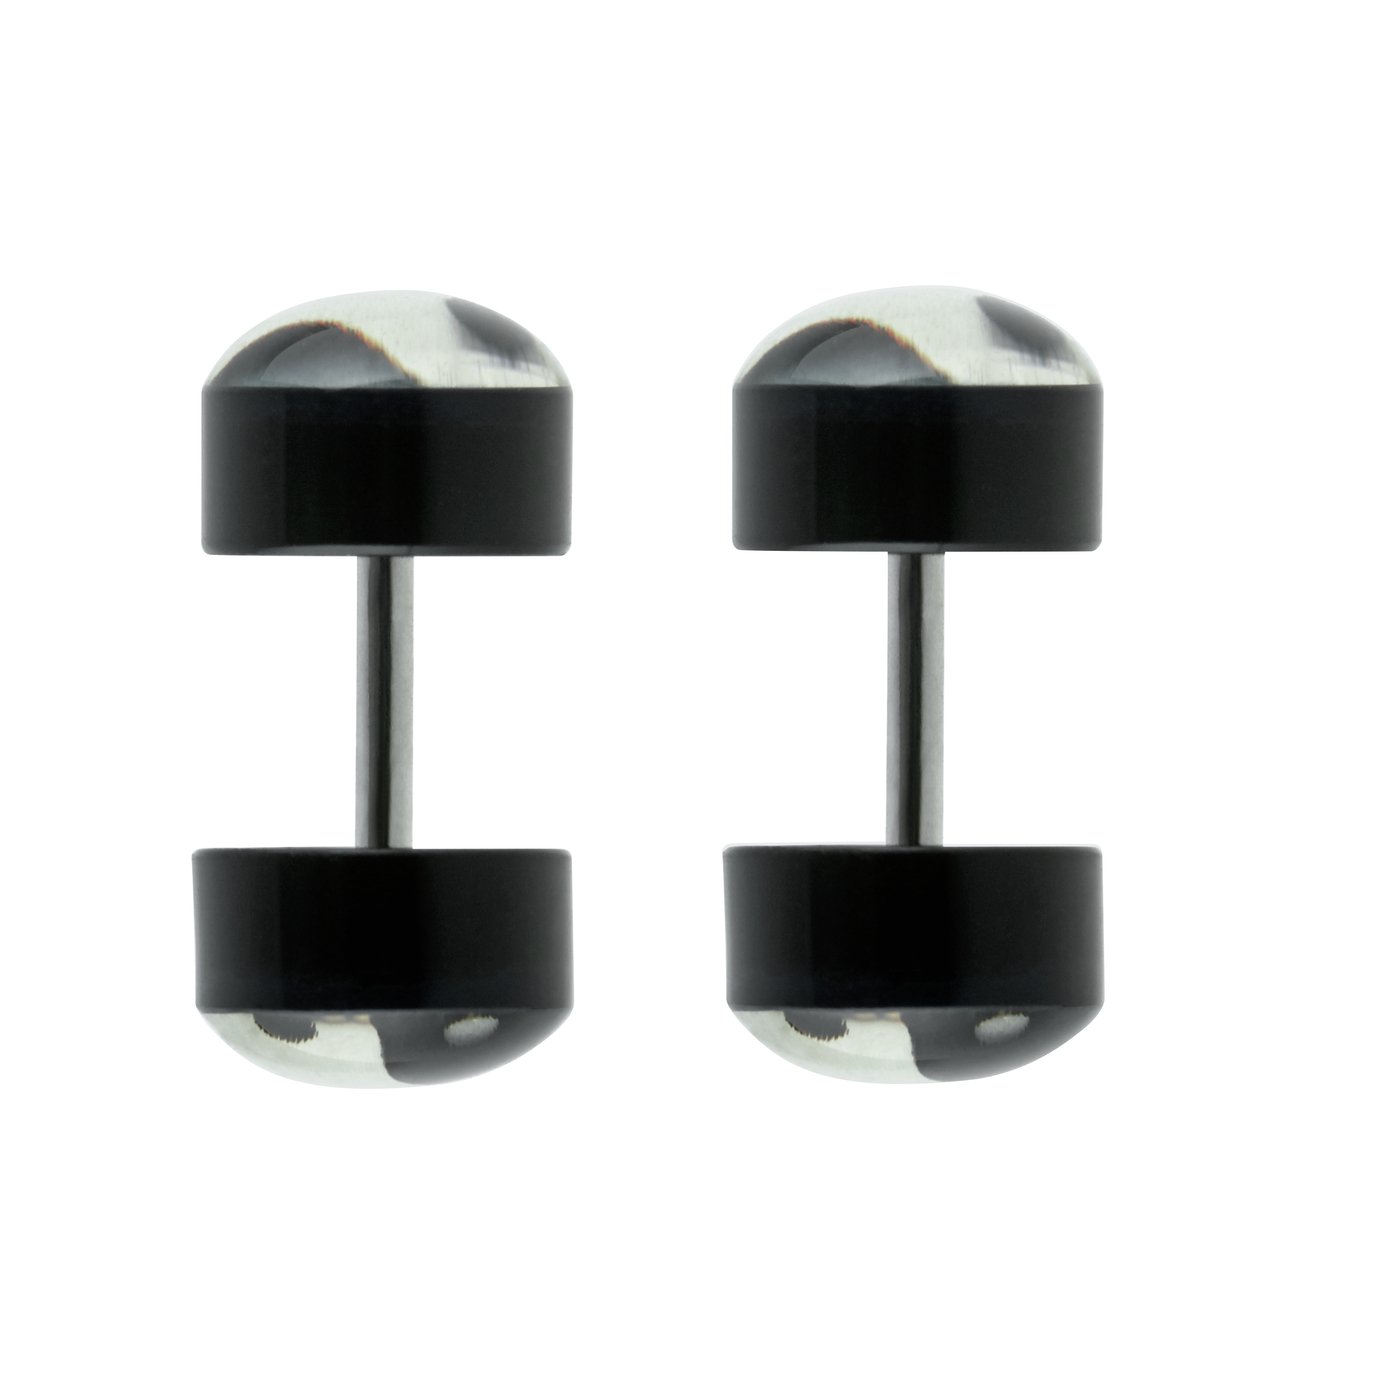 State of Mine Stainless Steel Ying Yang Fake Plug - Set of 2